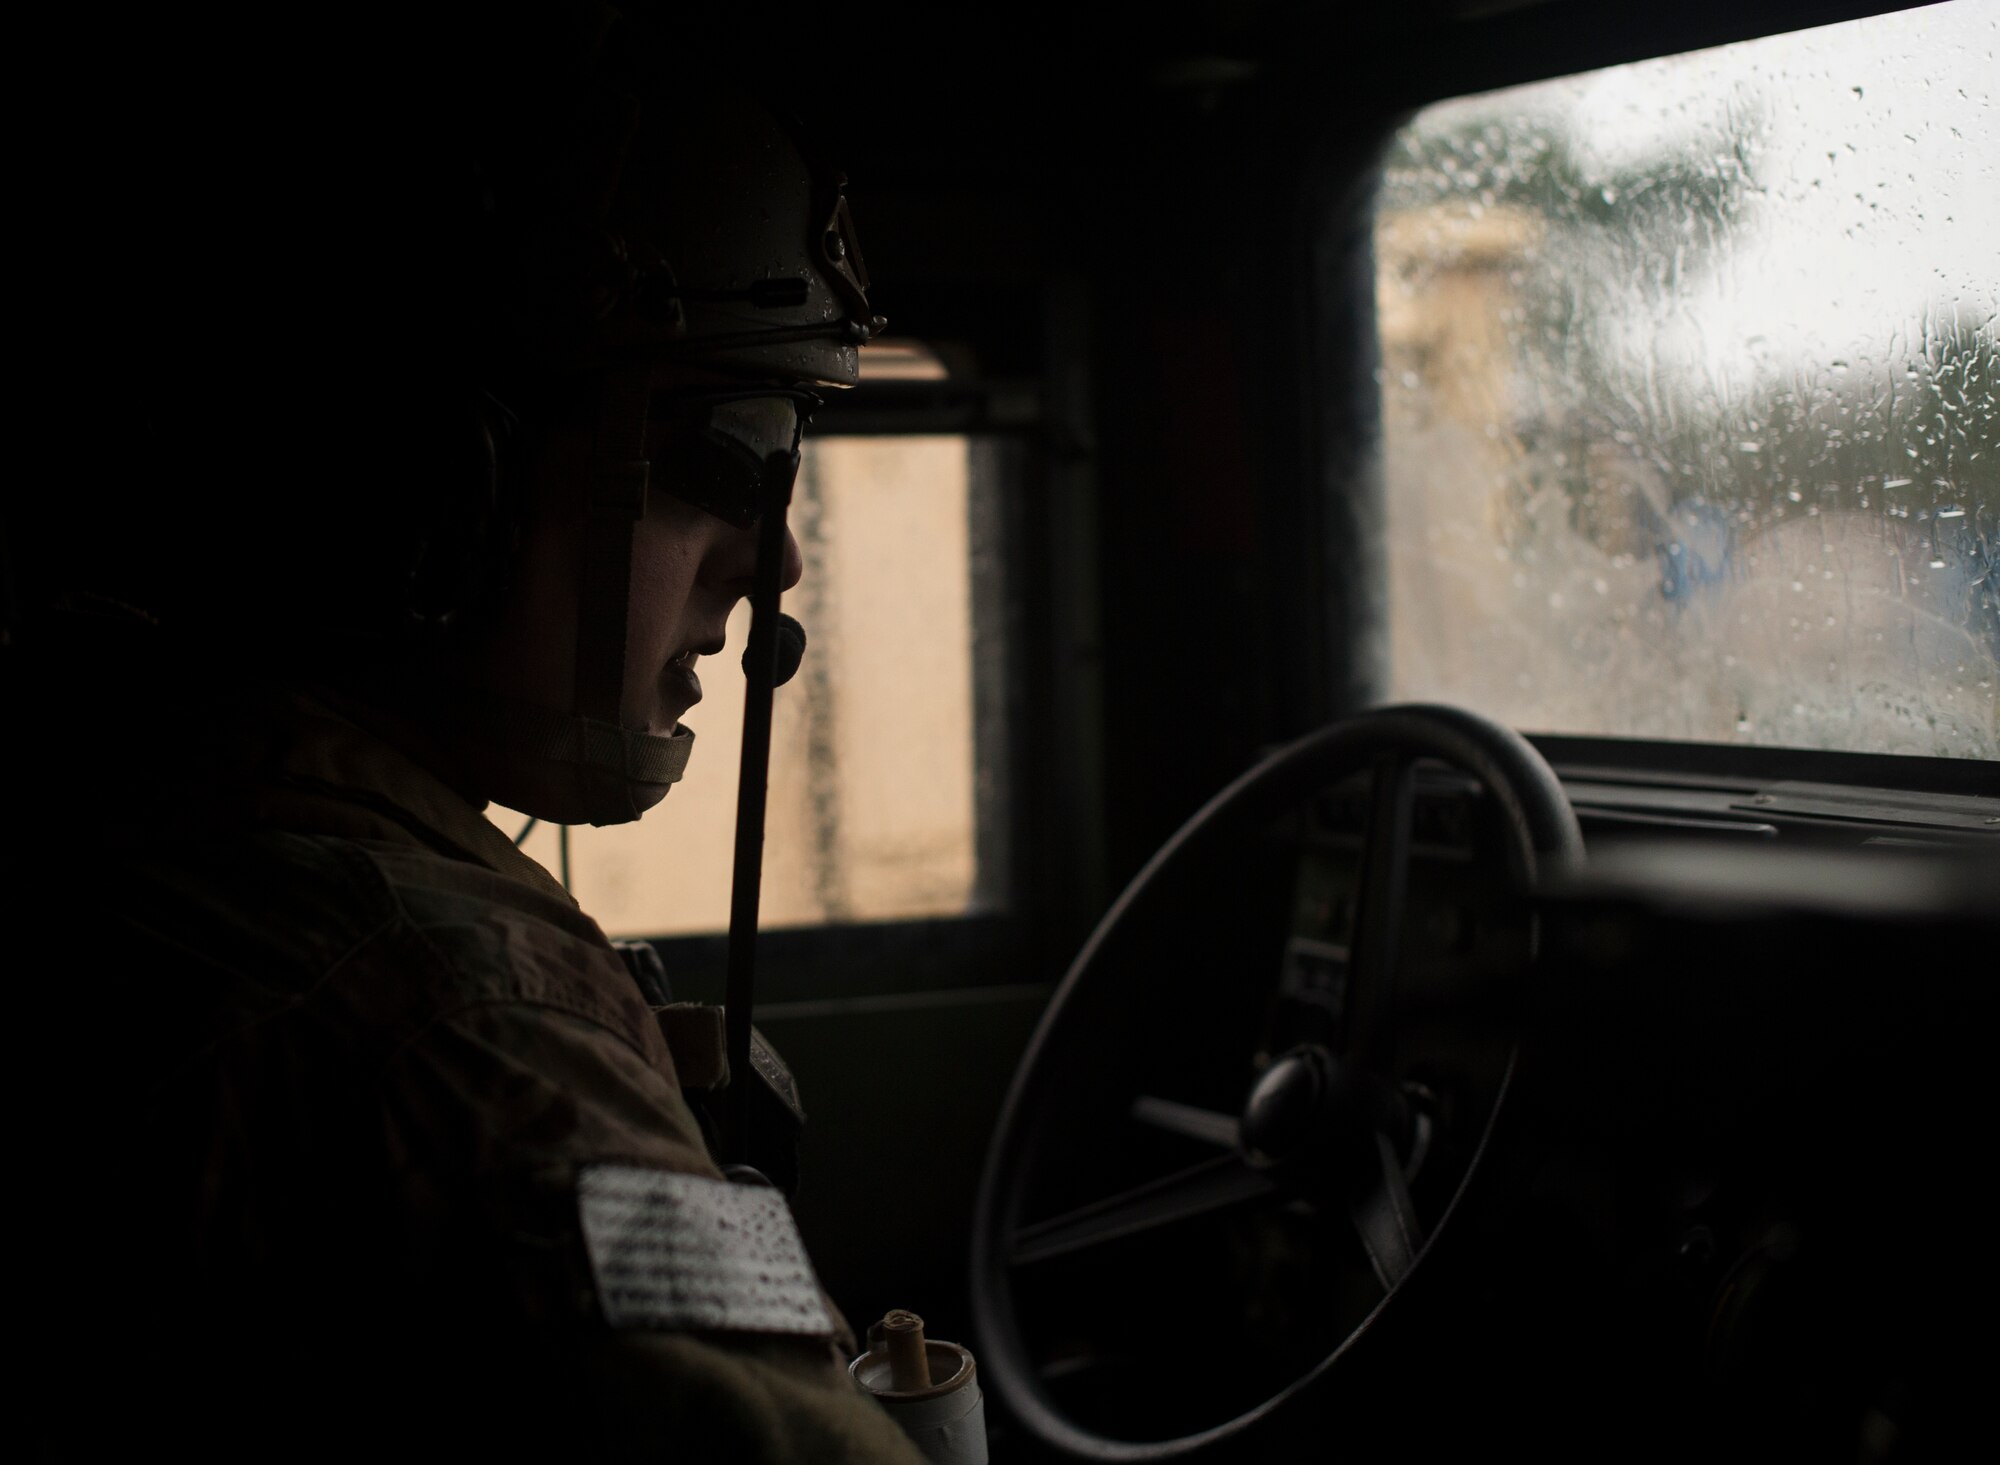 Senior Airman Logan Bennett, 2nd Air Support Operations Squadron joint terminal attack controller, drives through a simulated urban village during training at U.S. Army Garrison Bavaria in Vilseck, Germany, Feb. 9, 2016. The training consisted of 2nd ASOS Airmen calling in close air support, neutralizing opposing forces and practicing medical evacuation by helicopter. All ASOS Airmen begin their career as a tactical air control party. JTAC is a status earned after completing on-the-job training and thus qualified to call close air support. (U.S. Air Force photo/Senior Airman Jonathan Stefanko)